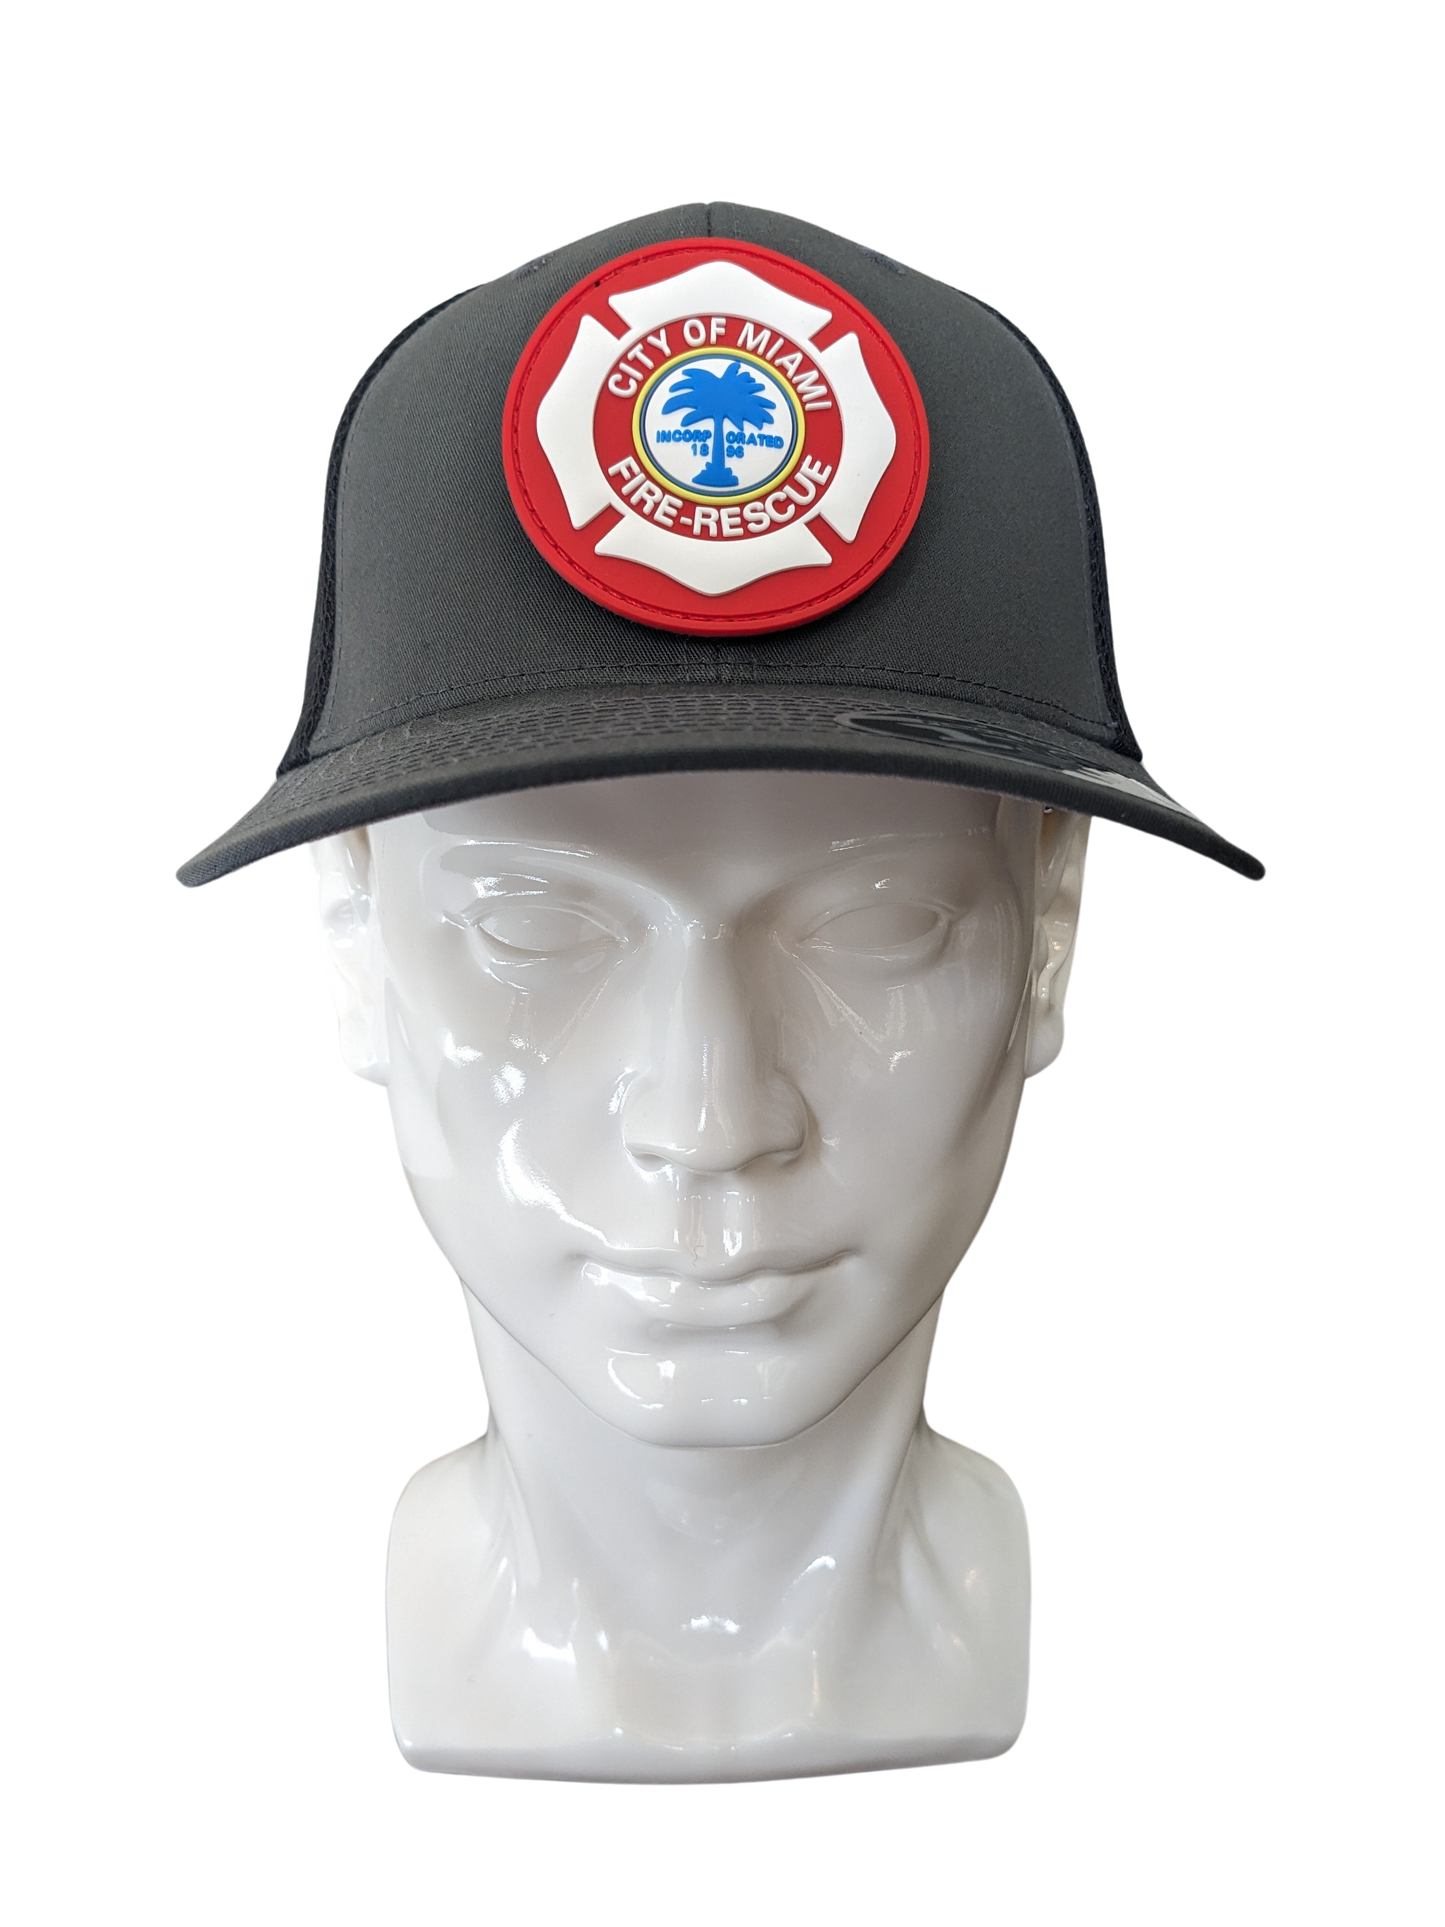 City of Miami Fire Rescue Removable PVC Patch Hat